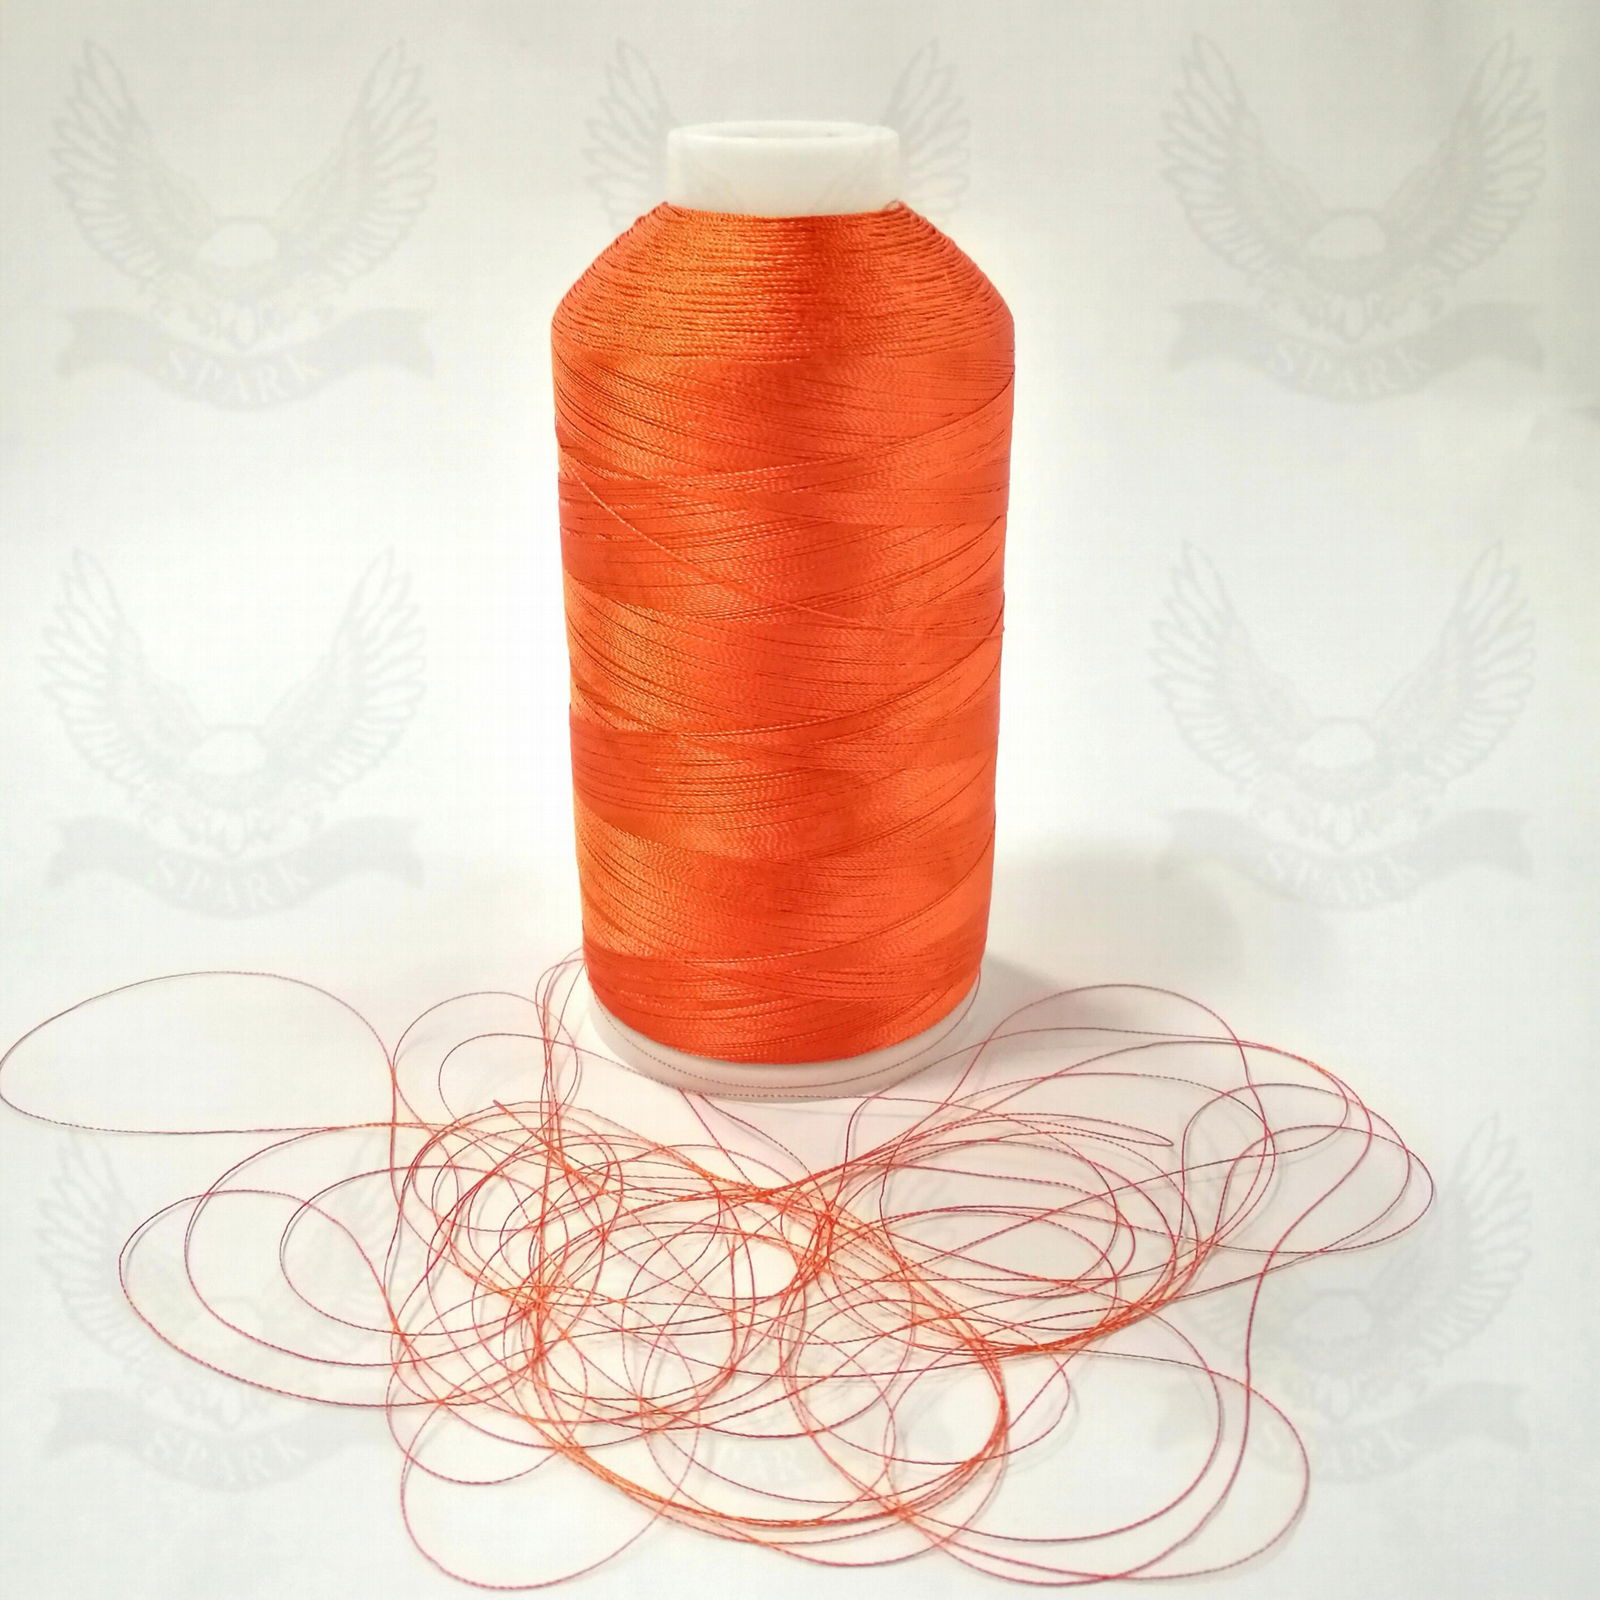 100% dyed viscose rayon embroidery thread 